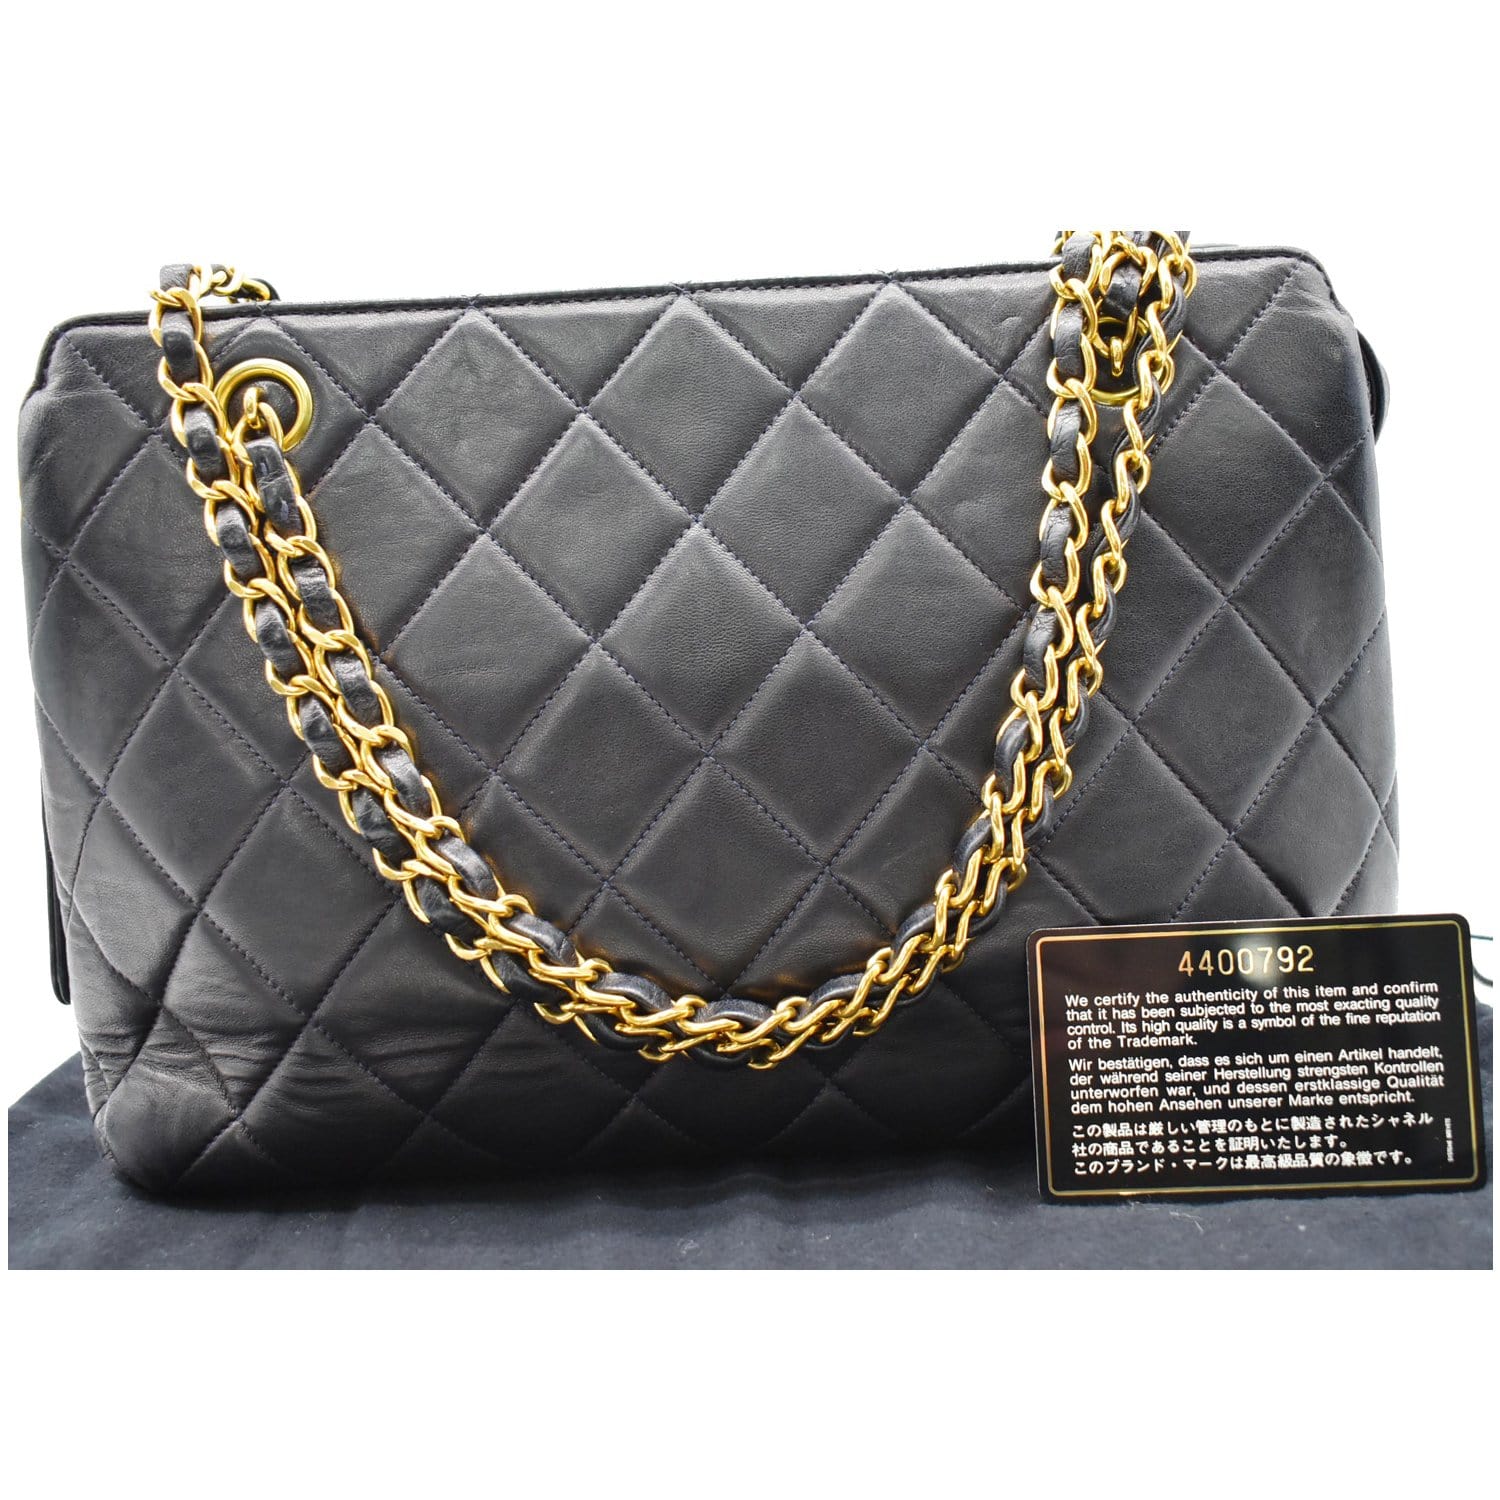 CHANEL CHANEL Caviar Quilted Bags & Handbags for Women, Authenticity  Guaranteed